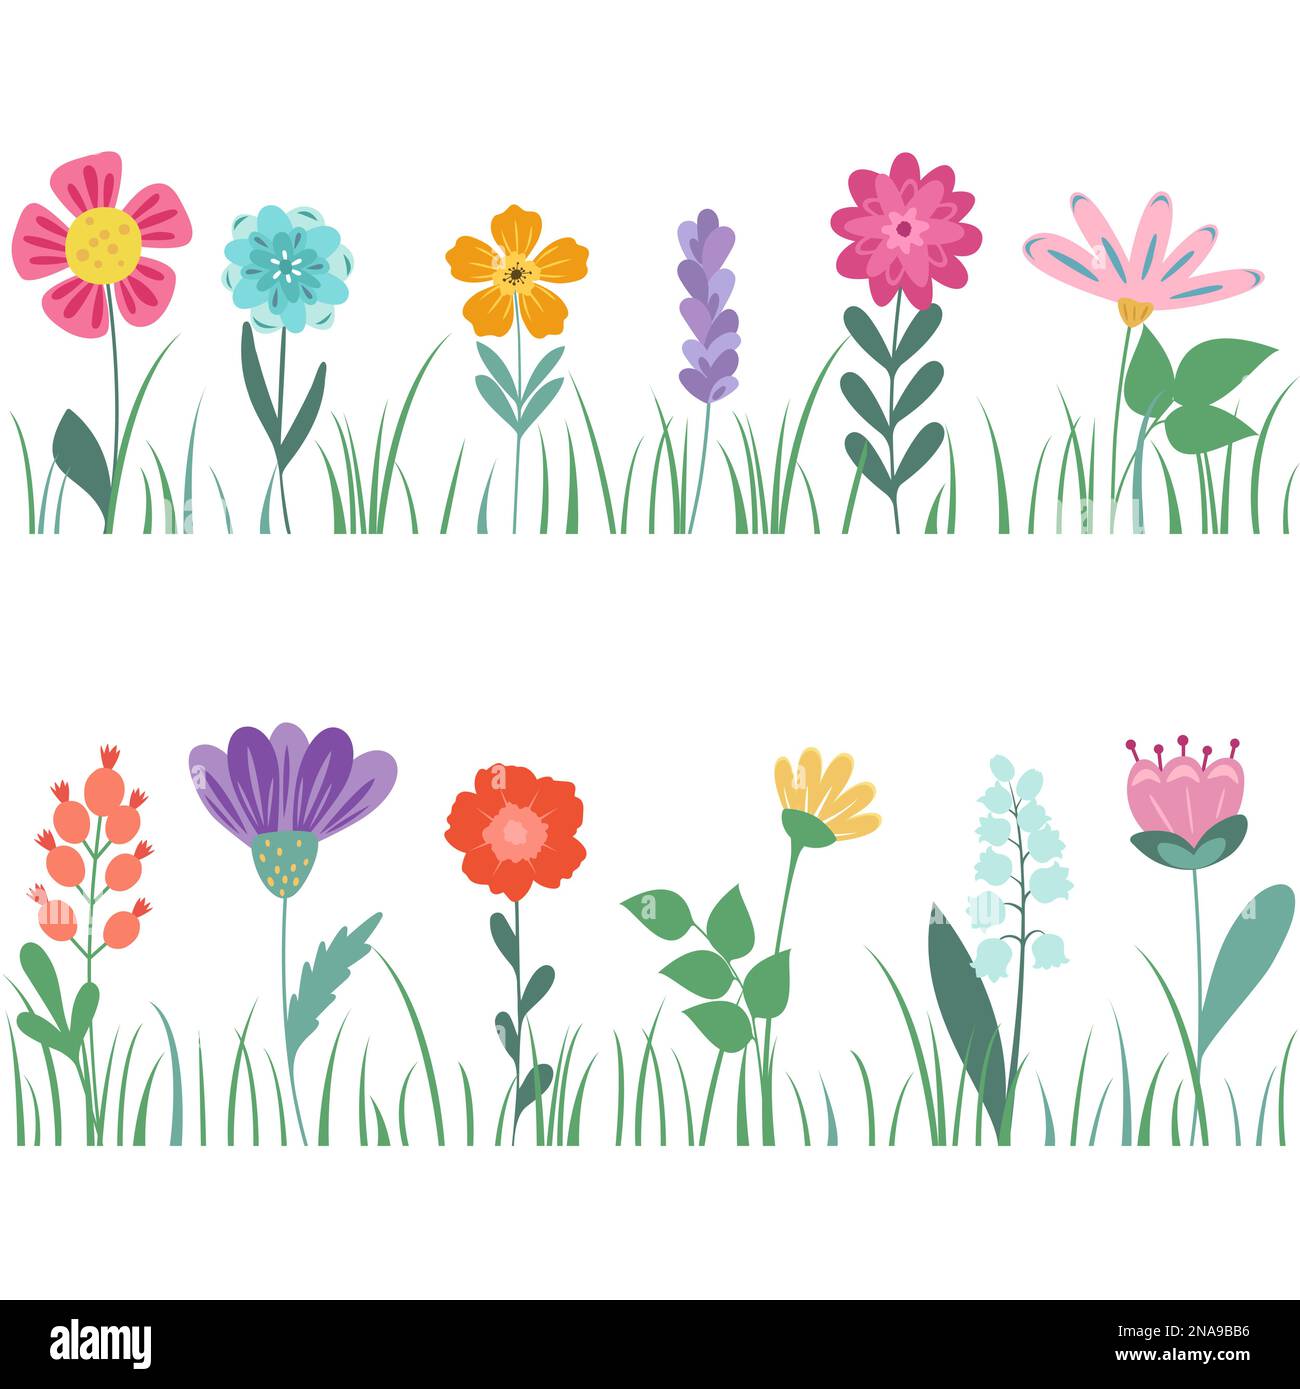 Flowers and leaves graphic floral design elements Vector Image